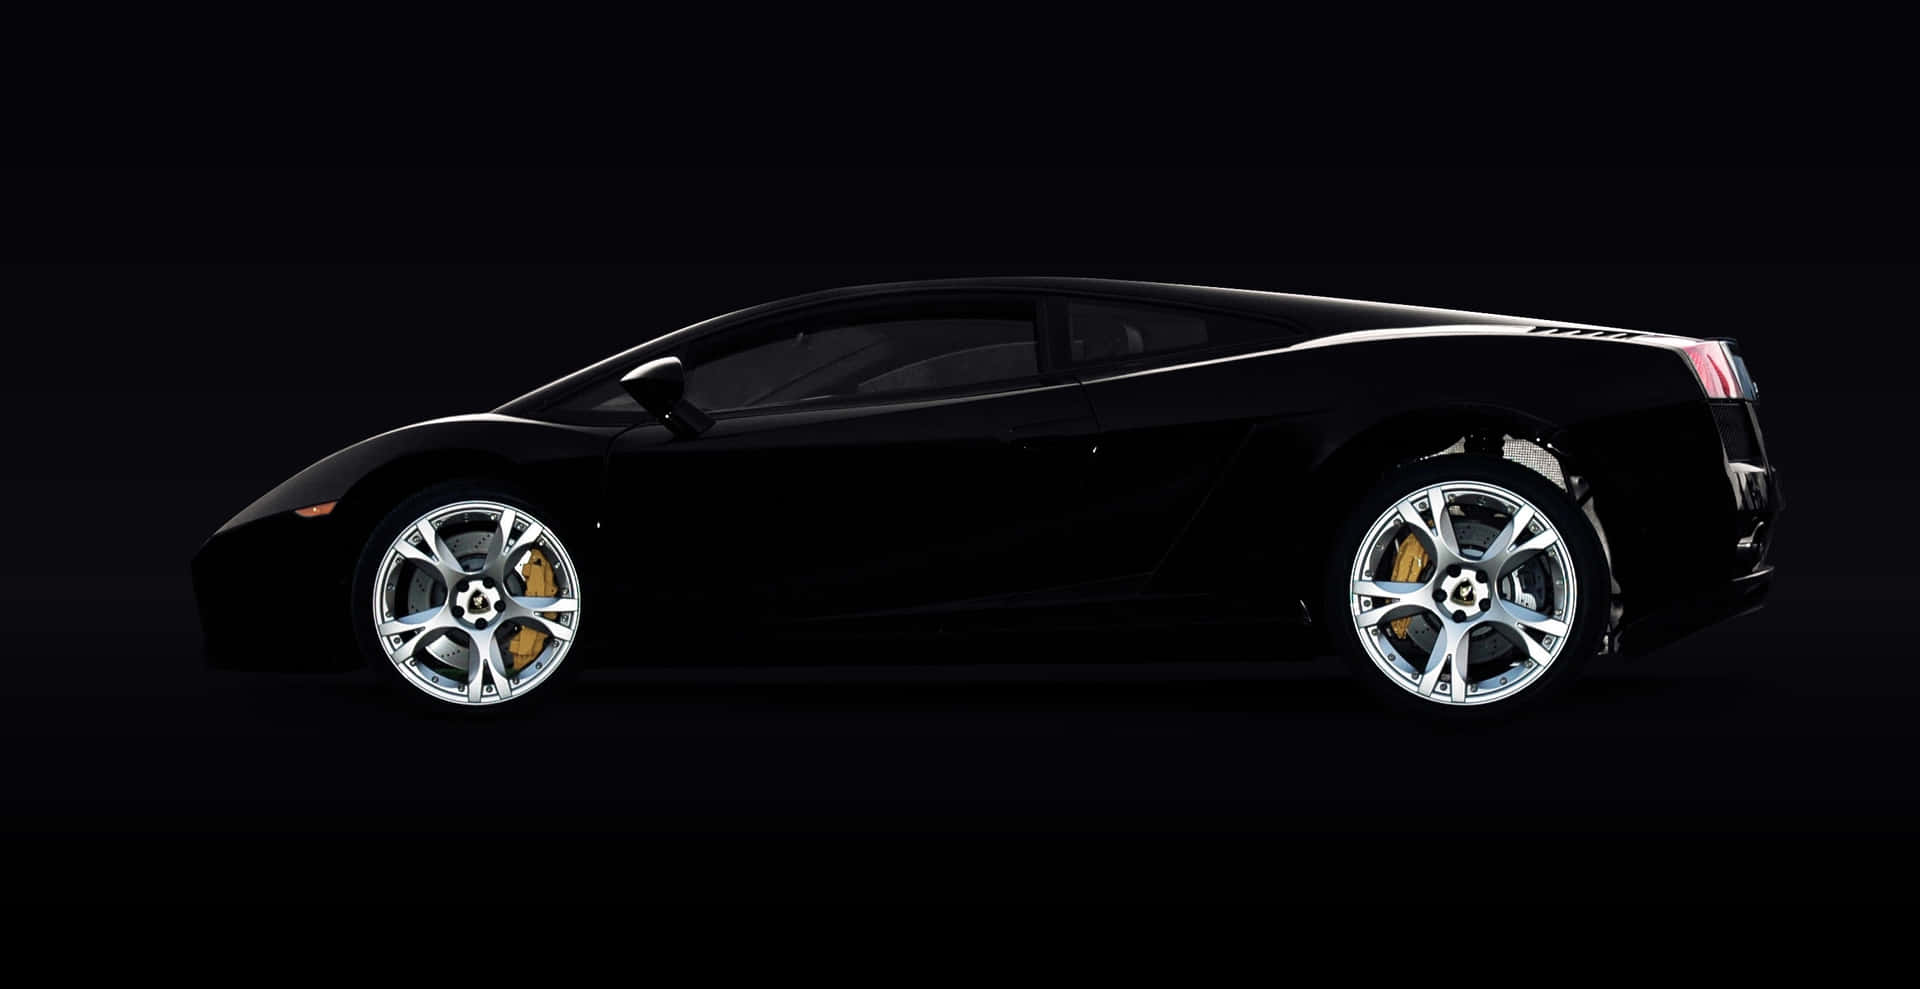 A Black Sports Car Is Shown On A Black Background